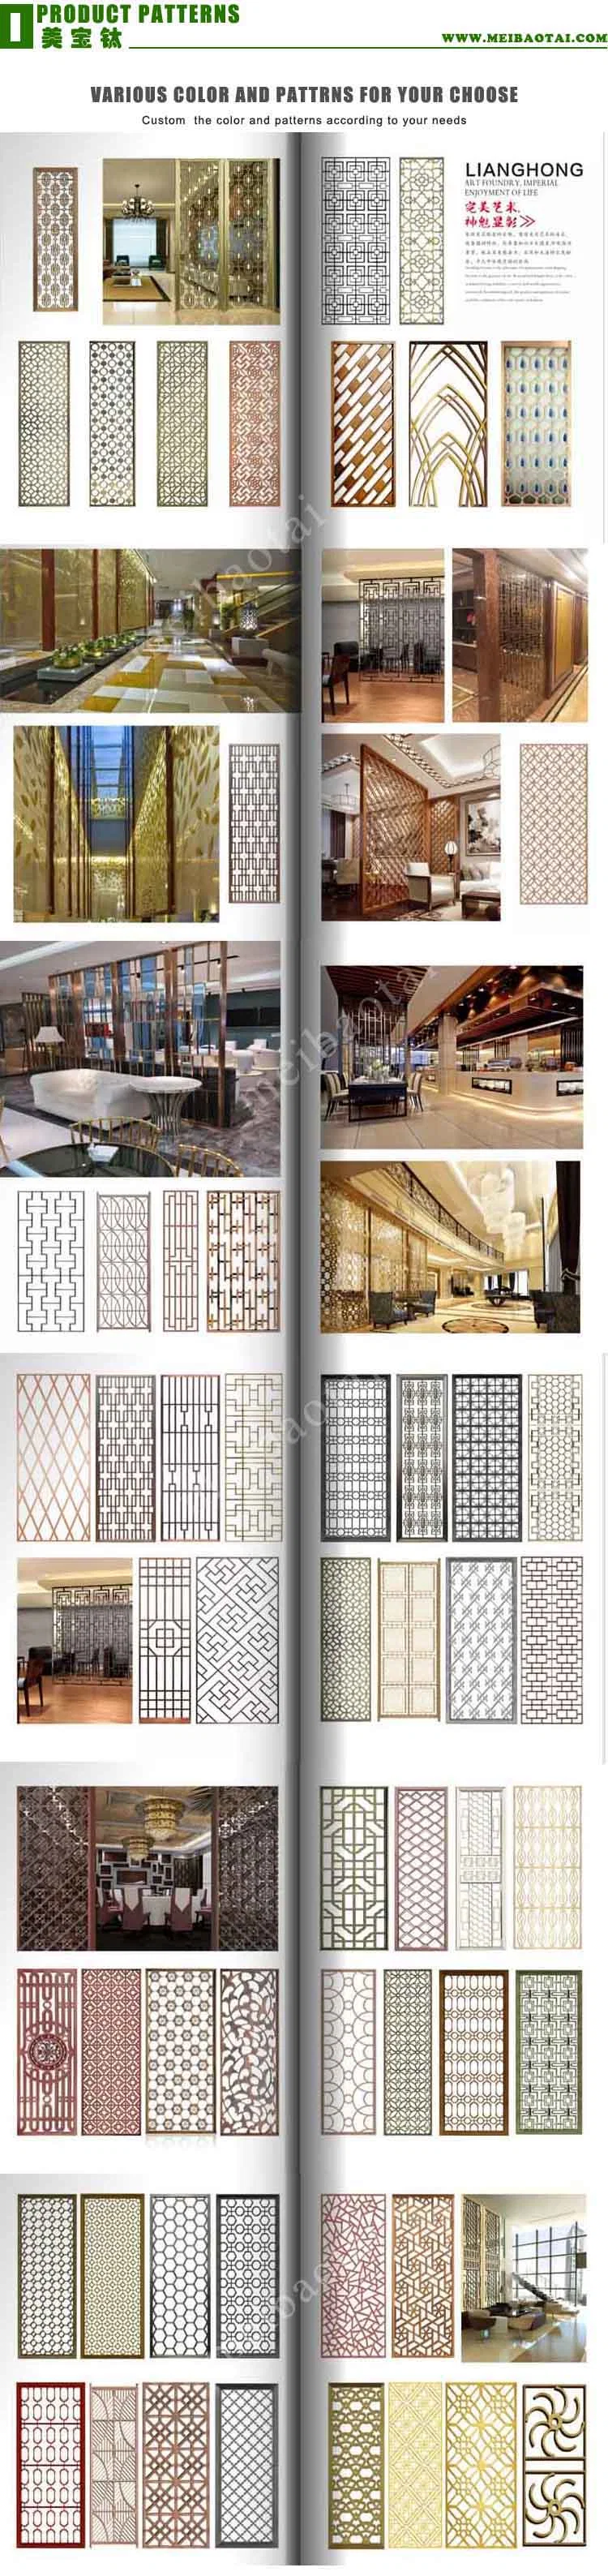 Stainless Steel Color Decorative Palte Privacy Metal Partition Stainless Steel Screen